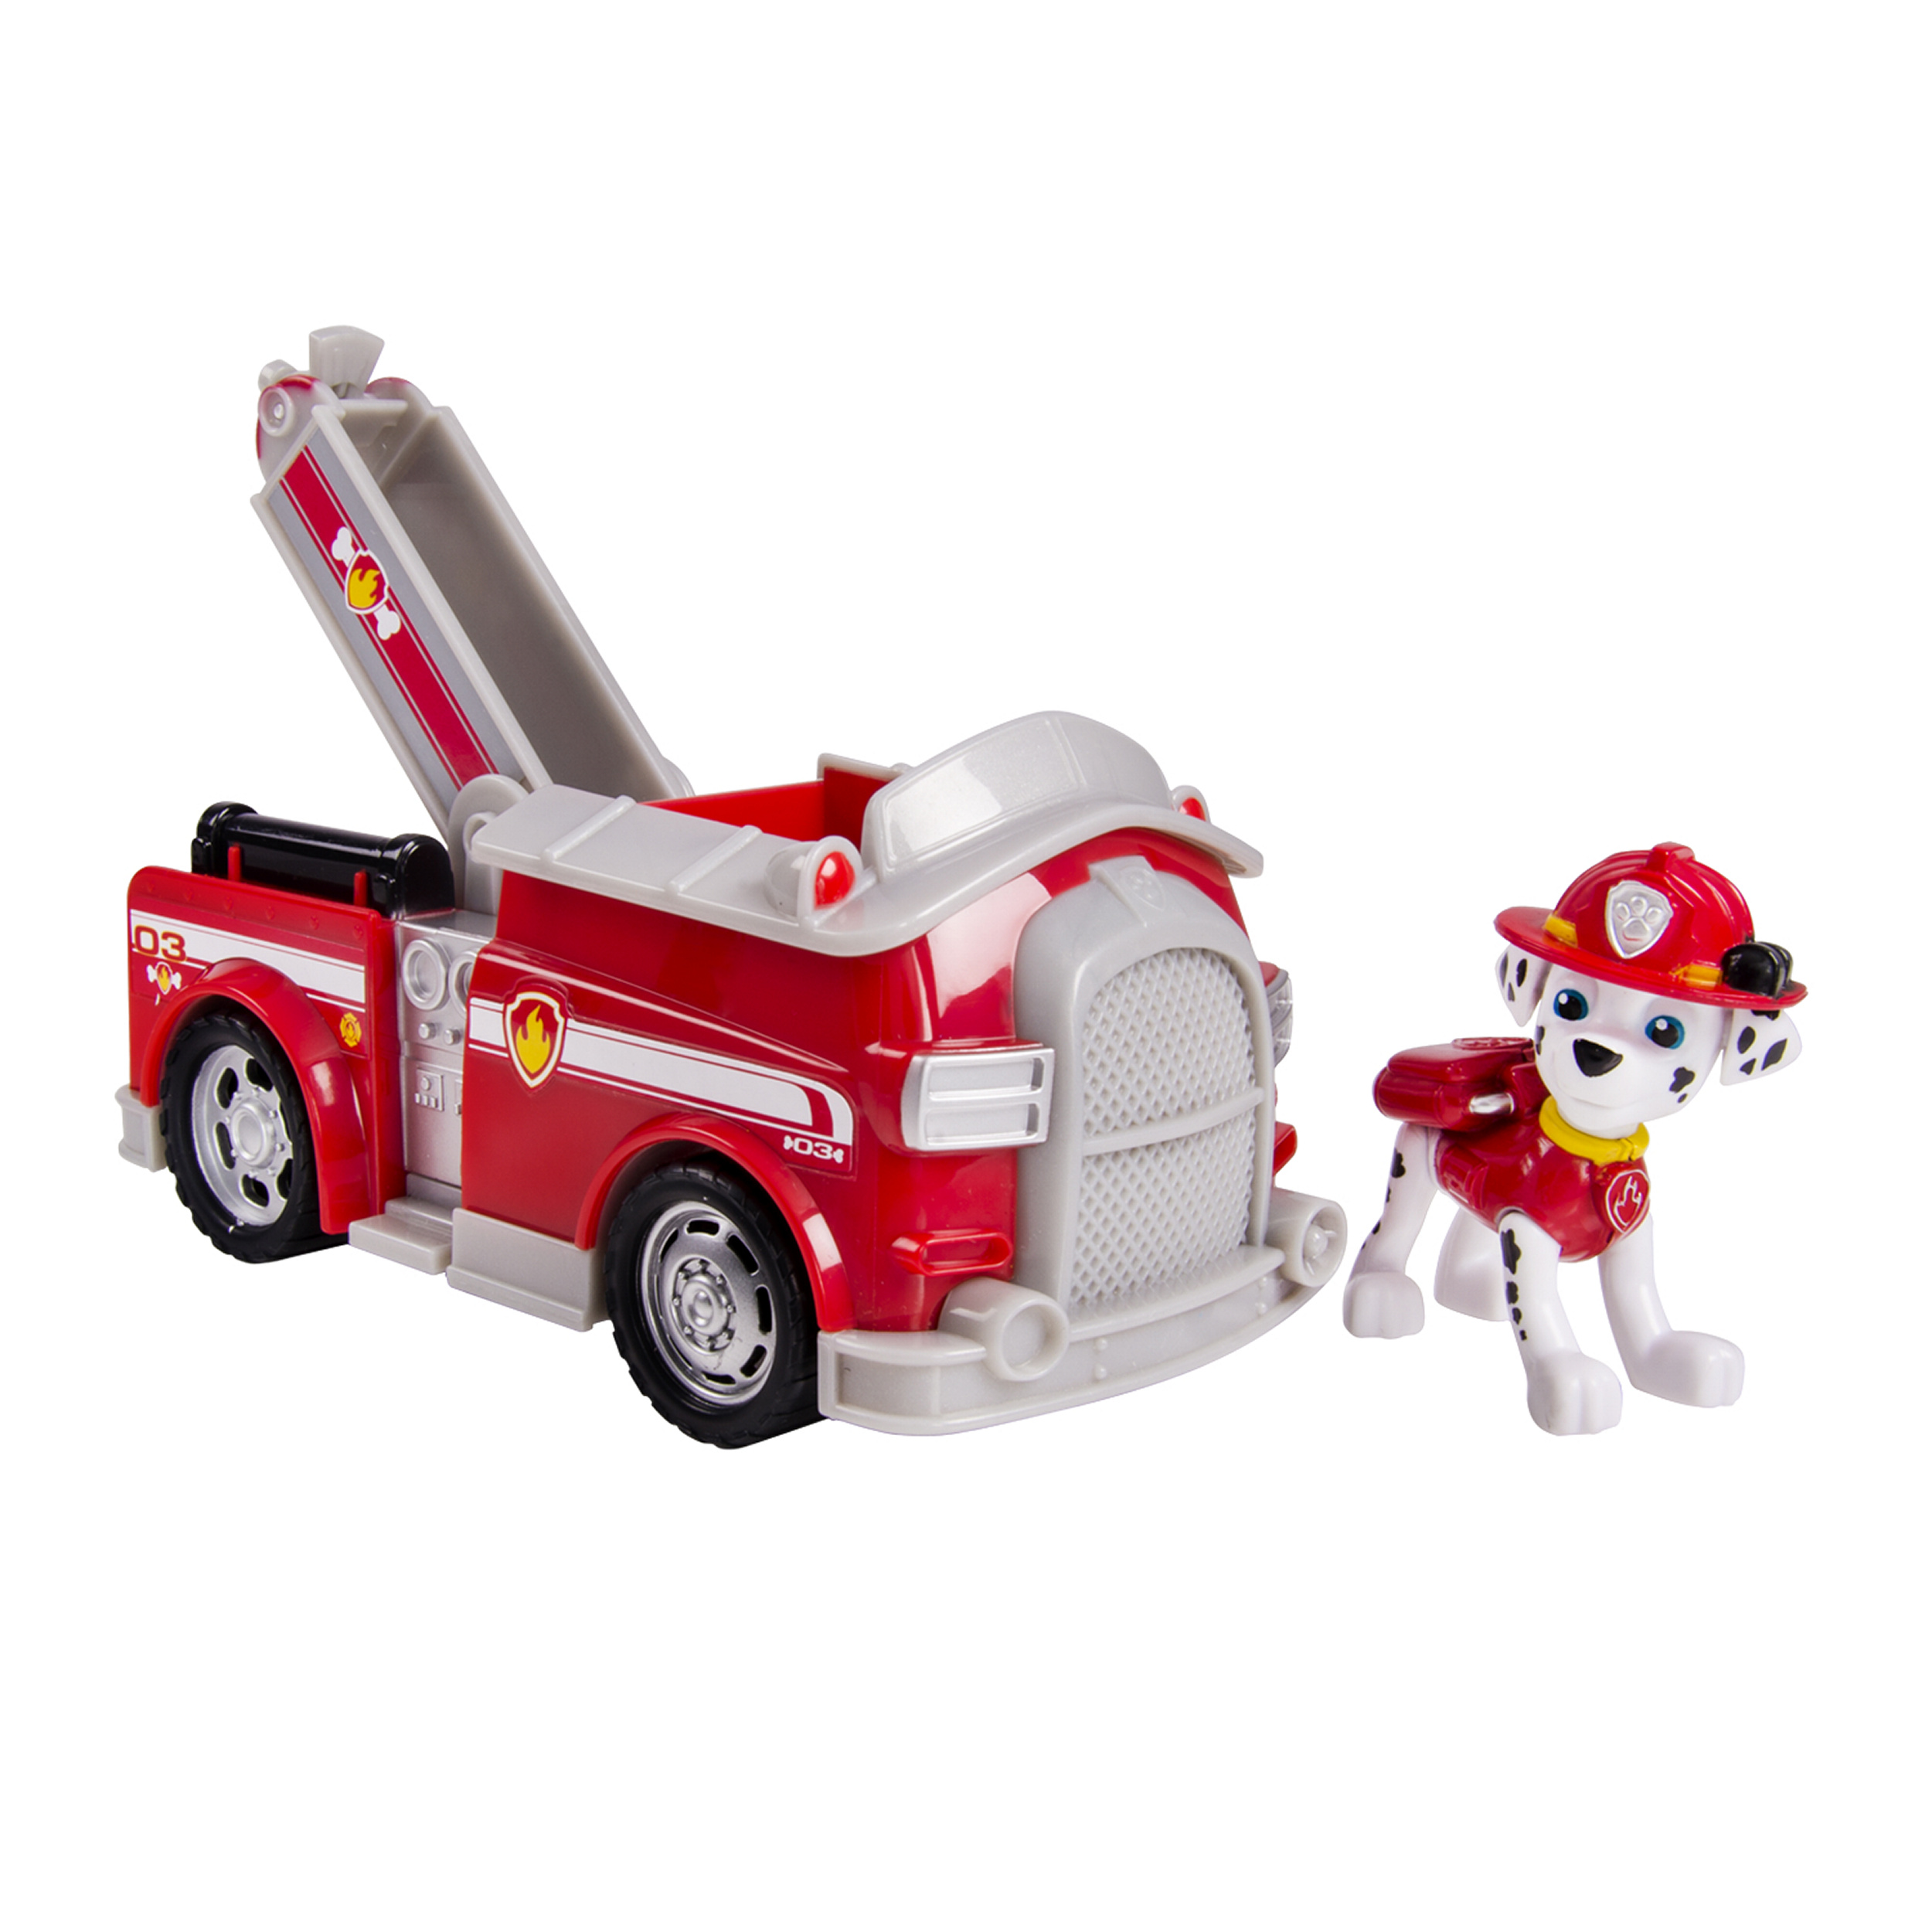 Paw Patrol Marshall's Fire Fightin' Truck, Vehicle and Figure - image 1 of 6